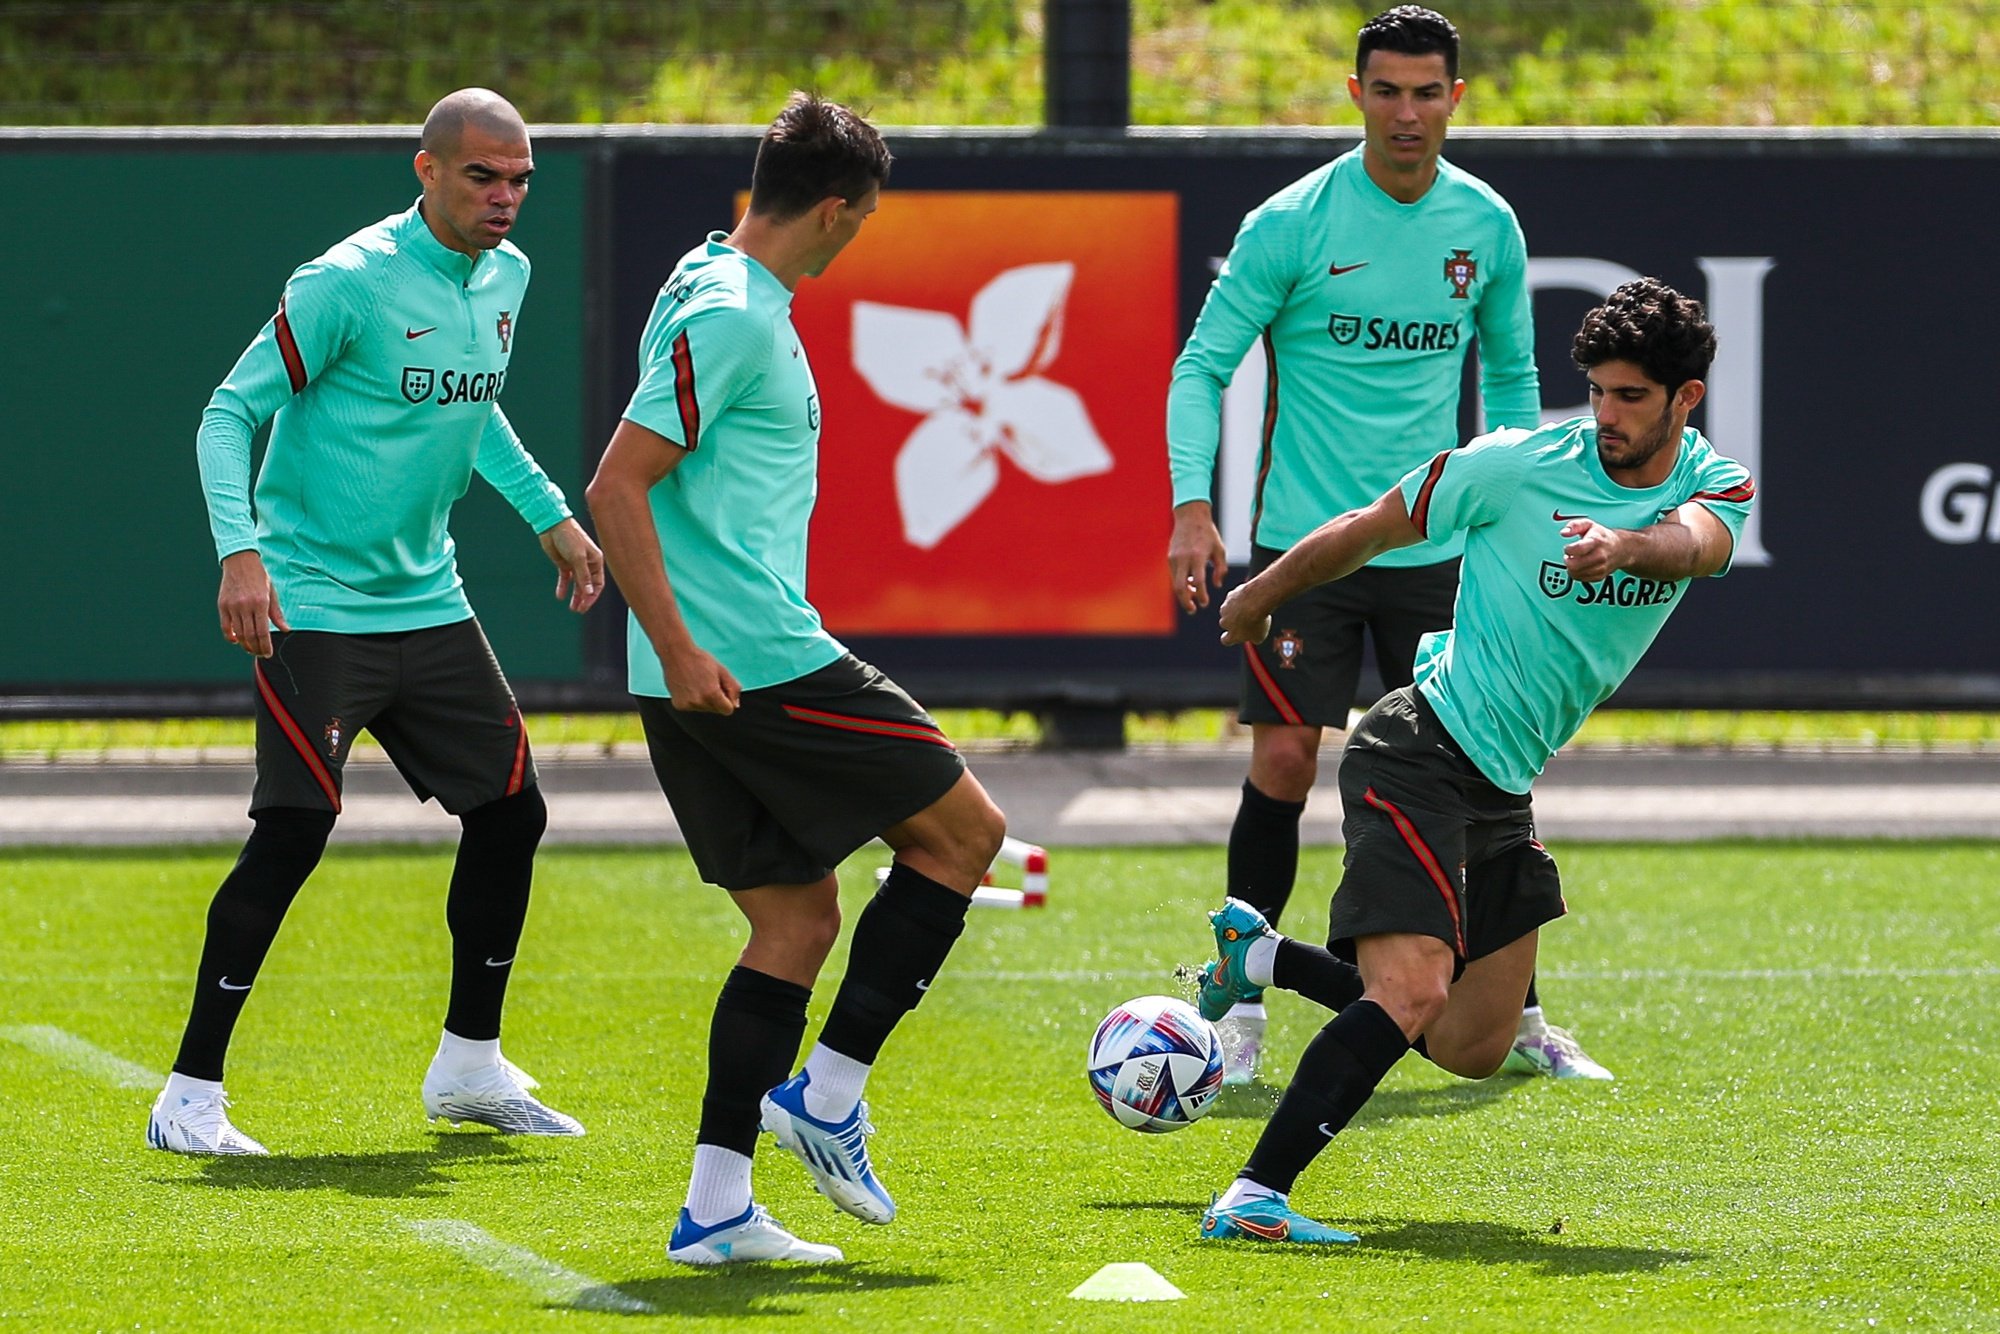 epa09989269 Portugal soccer team players (L-R) Pepe, Joao Palhinha, Cristiano Ronaldo and Goncalo Guedes during the training session at Cidade do Futebol in Oeiras, outskirts of Lisbon, Portugal, 01 June 2022. Portugal will play against Spain, Czech Republic and Switzerland for the upcoming UEFA Nations League.  EPA/JOSE SENA GOULAO